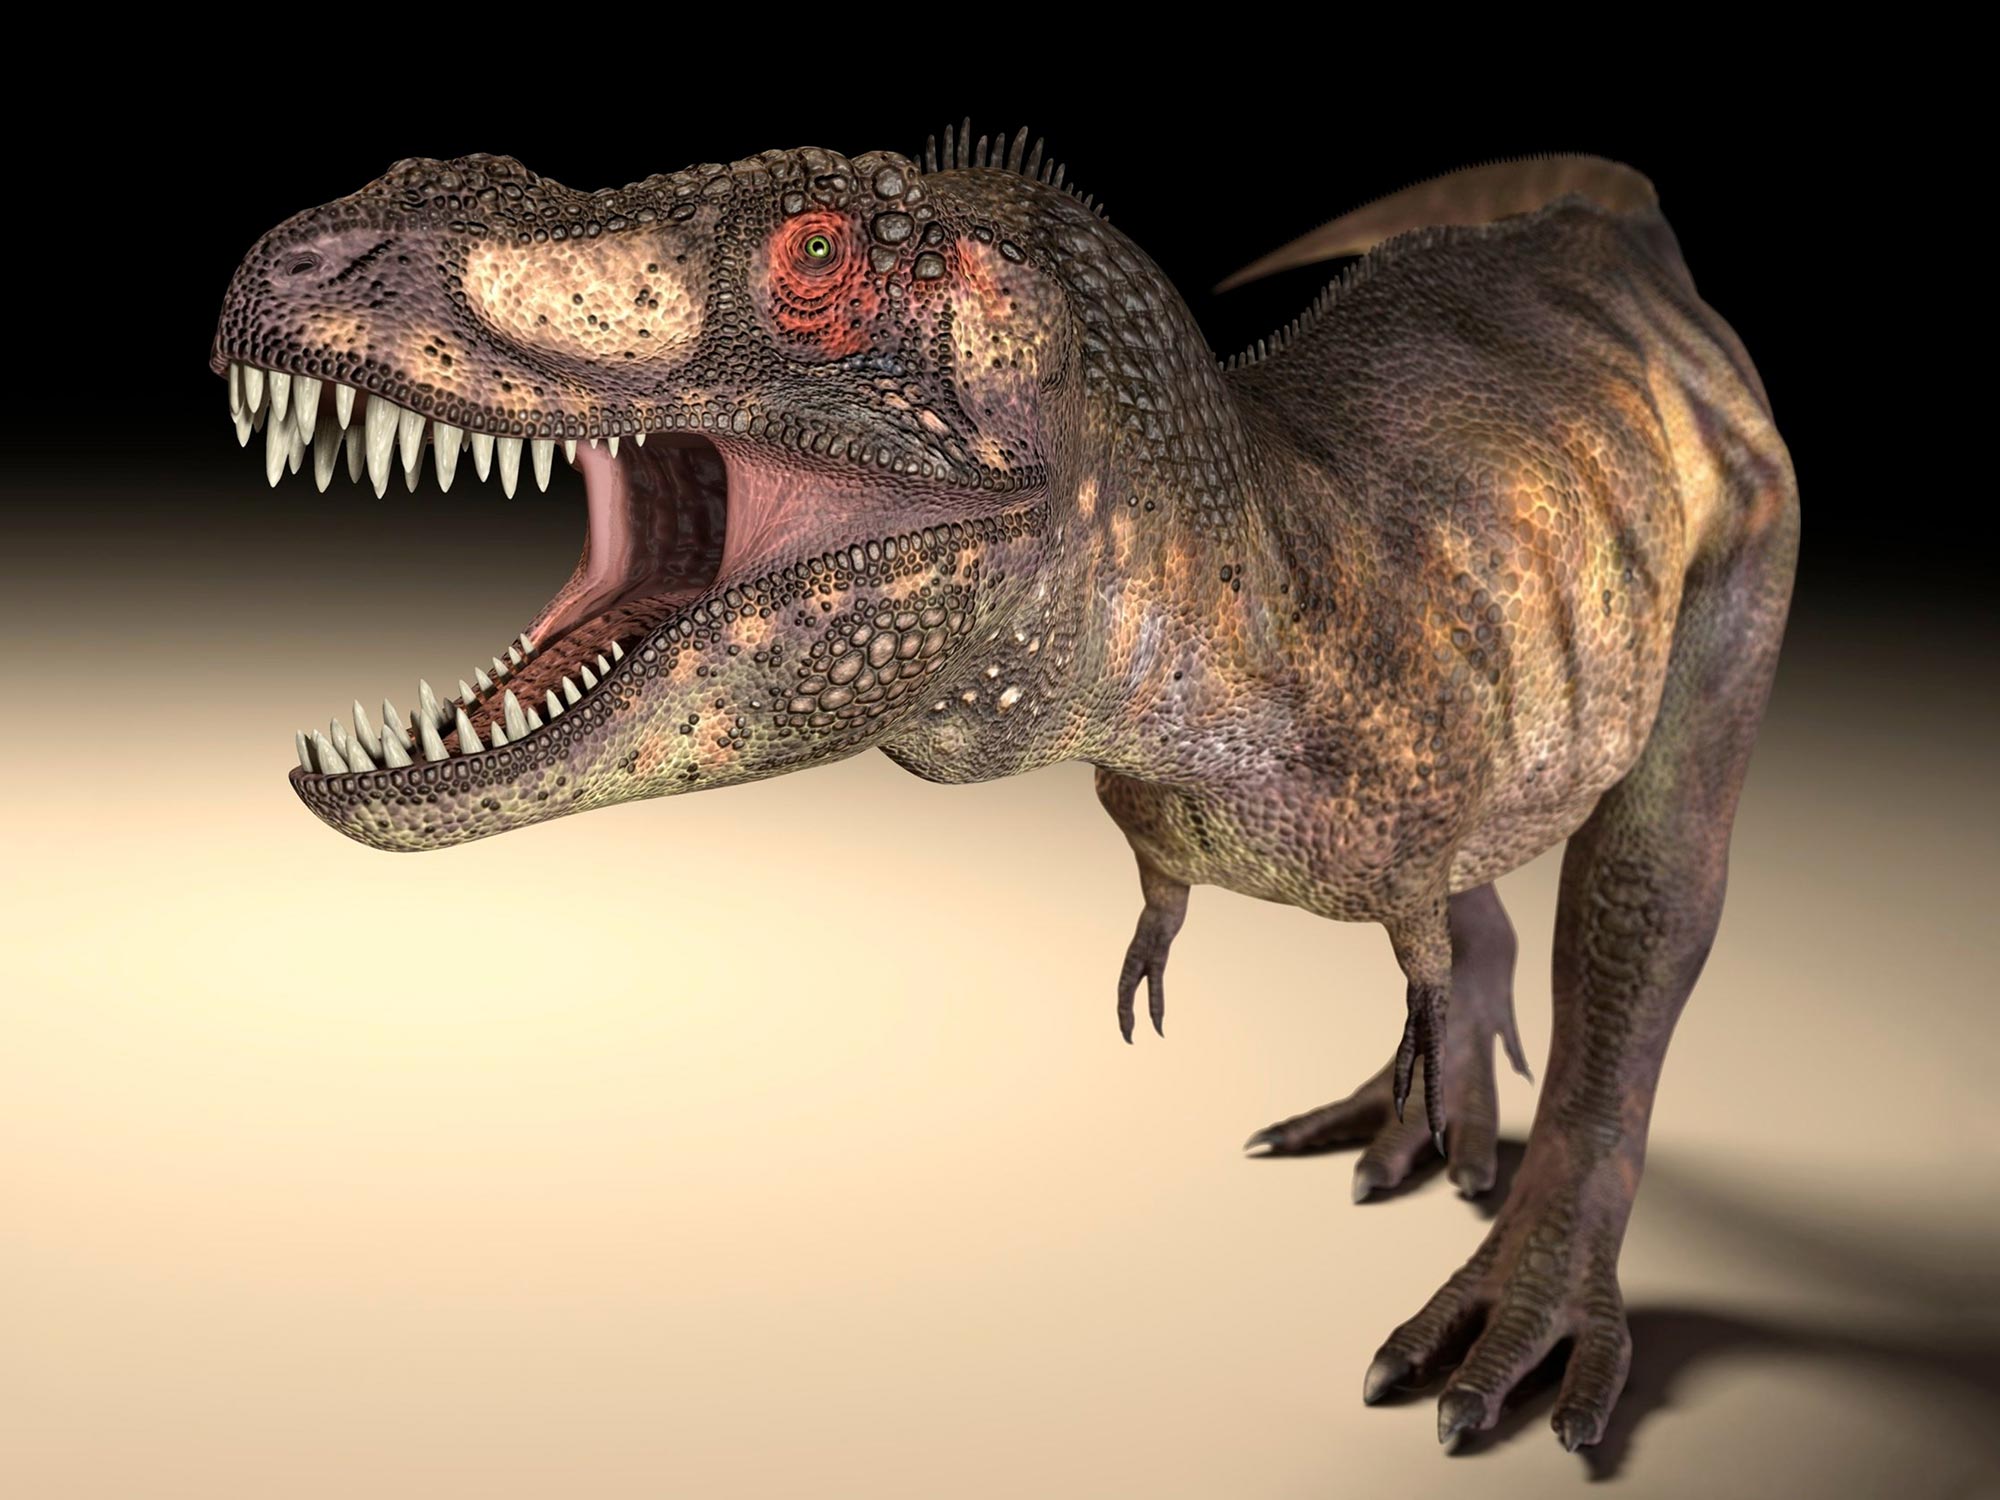 Massive Dinosaur Predators – Such As T. rex – Developed Other Eye Socket Shapes To Permit More potent Bites